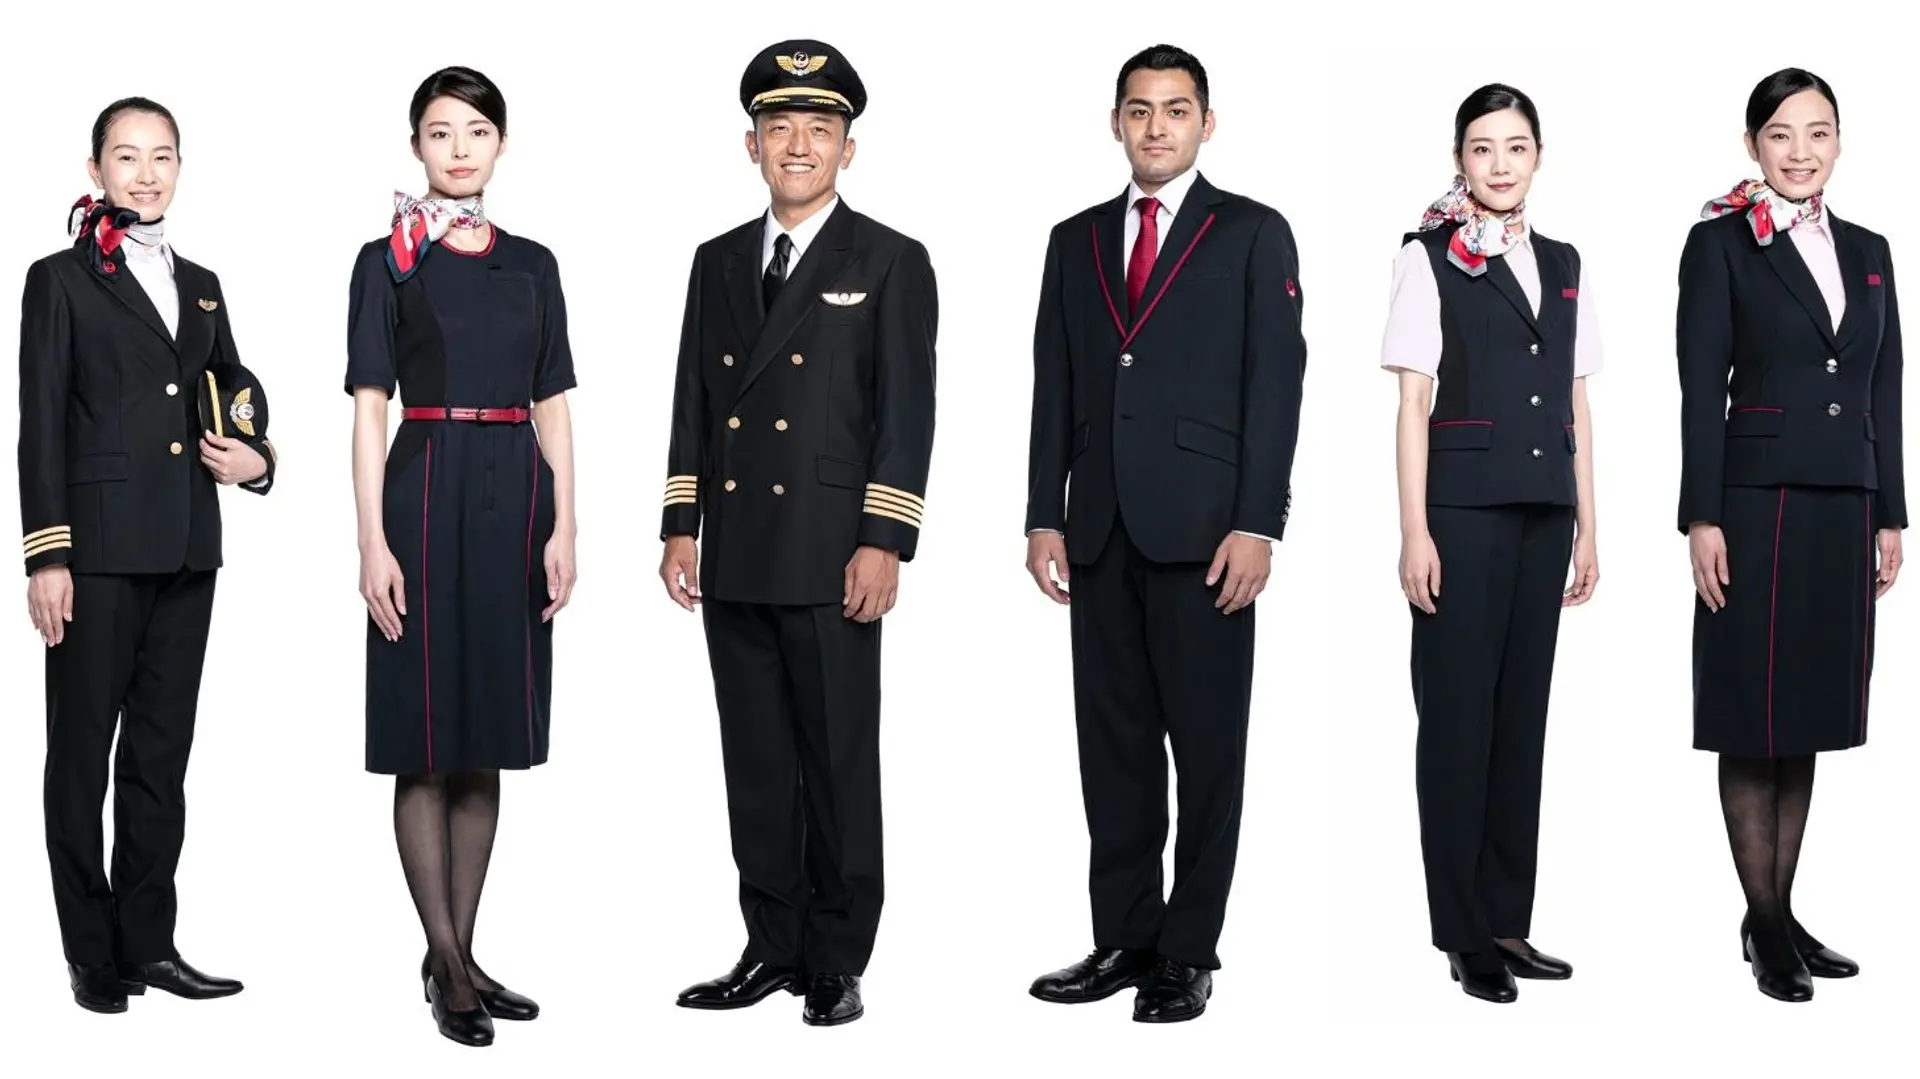 Airline review Service - Japan Airlines - 2